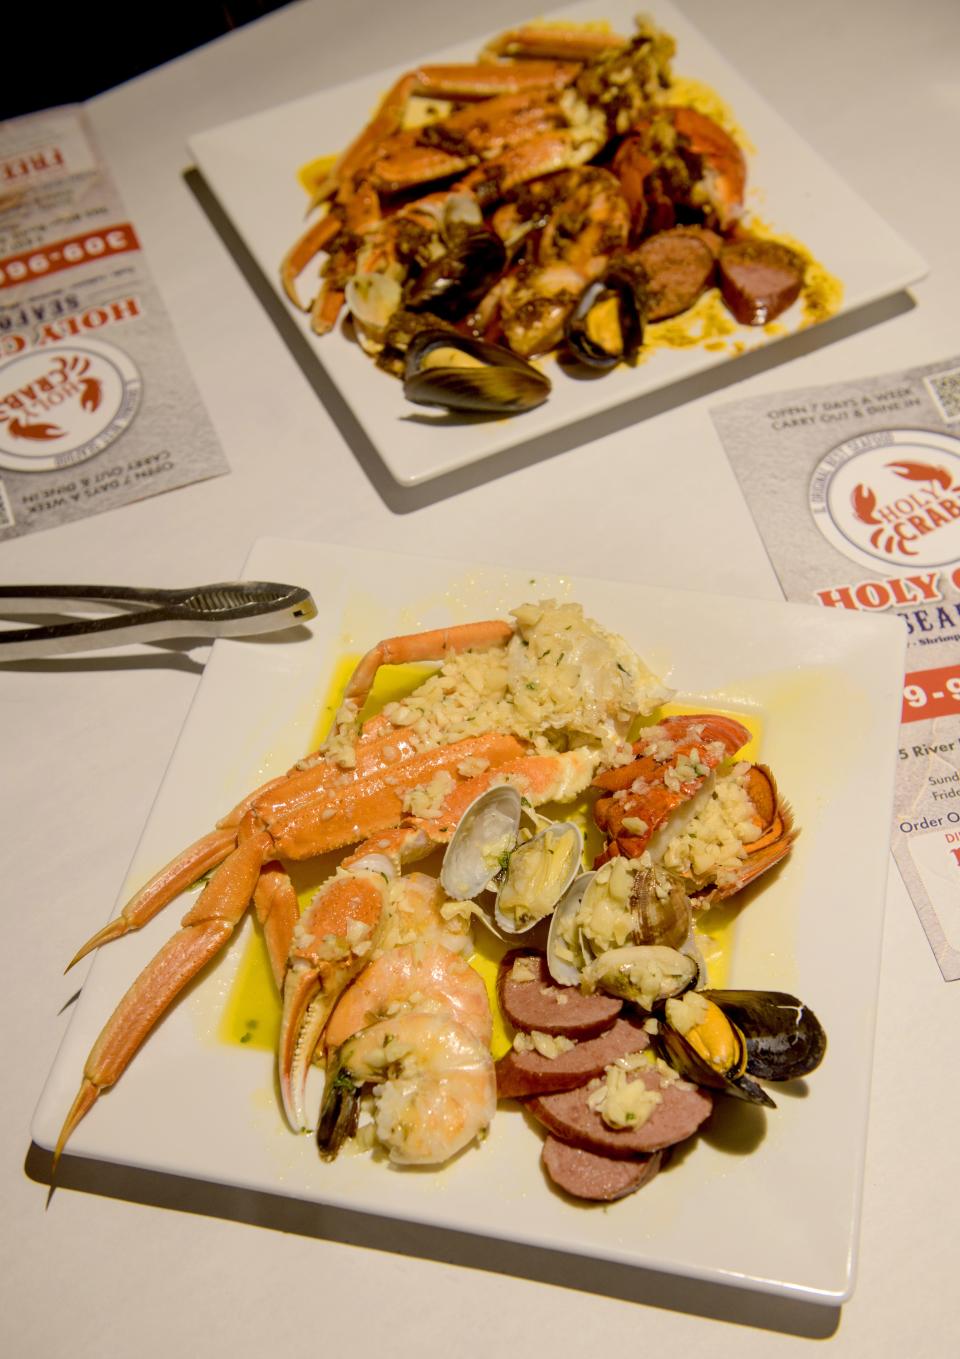 A sampler of Holy Crab's seafood boil includes snow crab, mussels, shrimp, lobster tail and sausage in a variety of sauces like garlic butter and Cajun sauce.